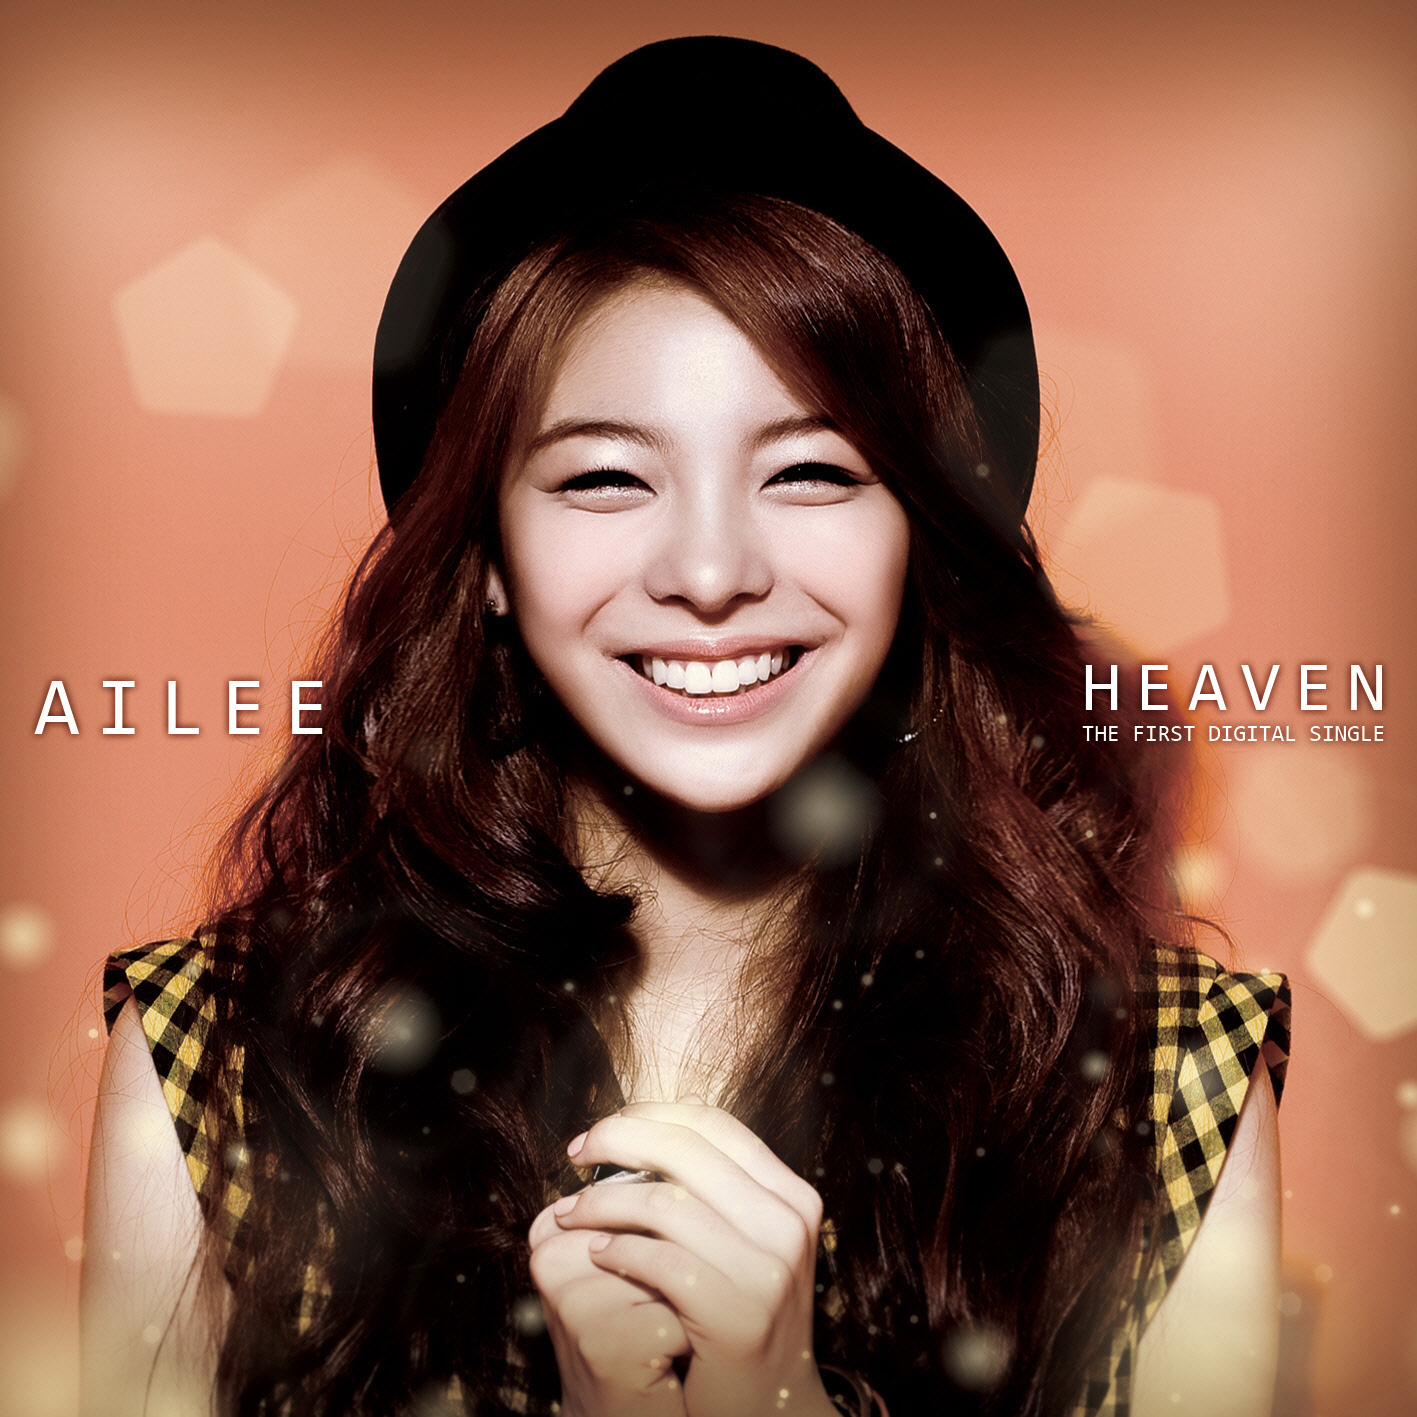 Anime, Manga and Music! Oh my!: Heaven - Ailee (에일리) [MUSIC REVIEW]